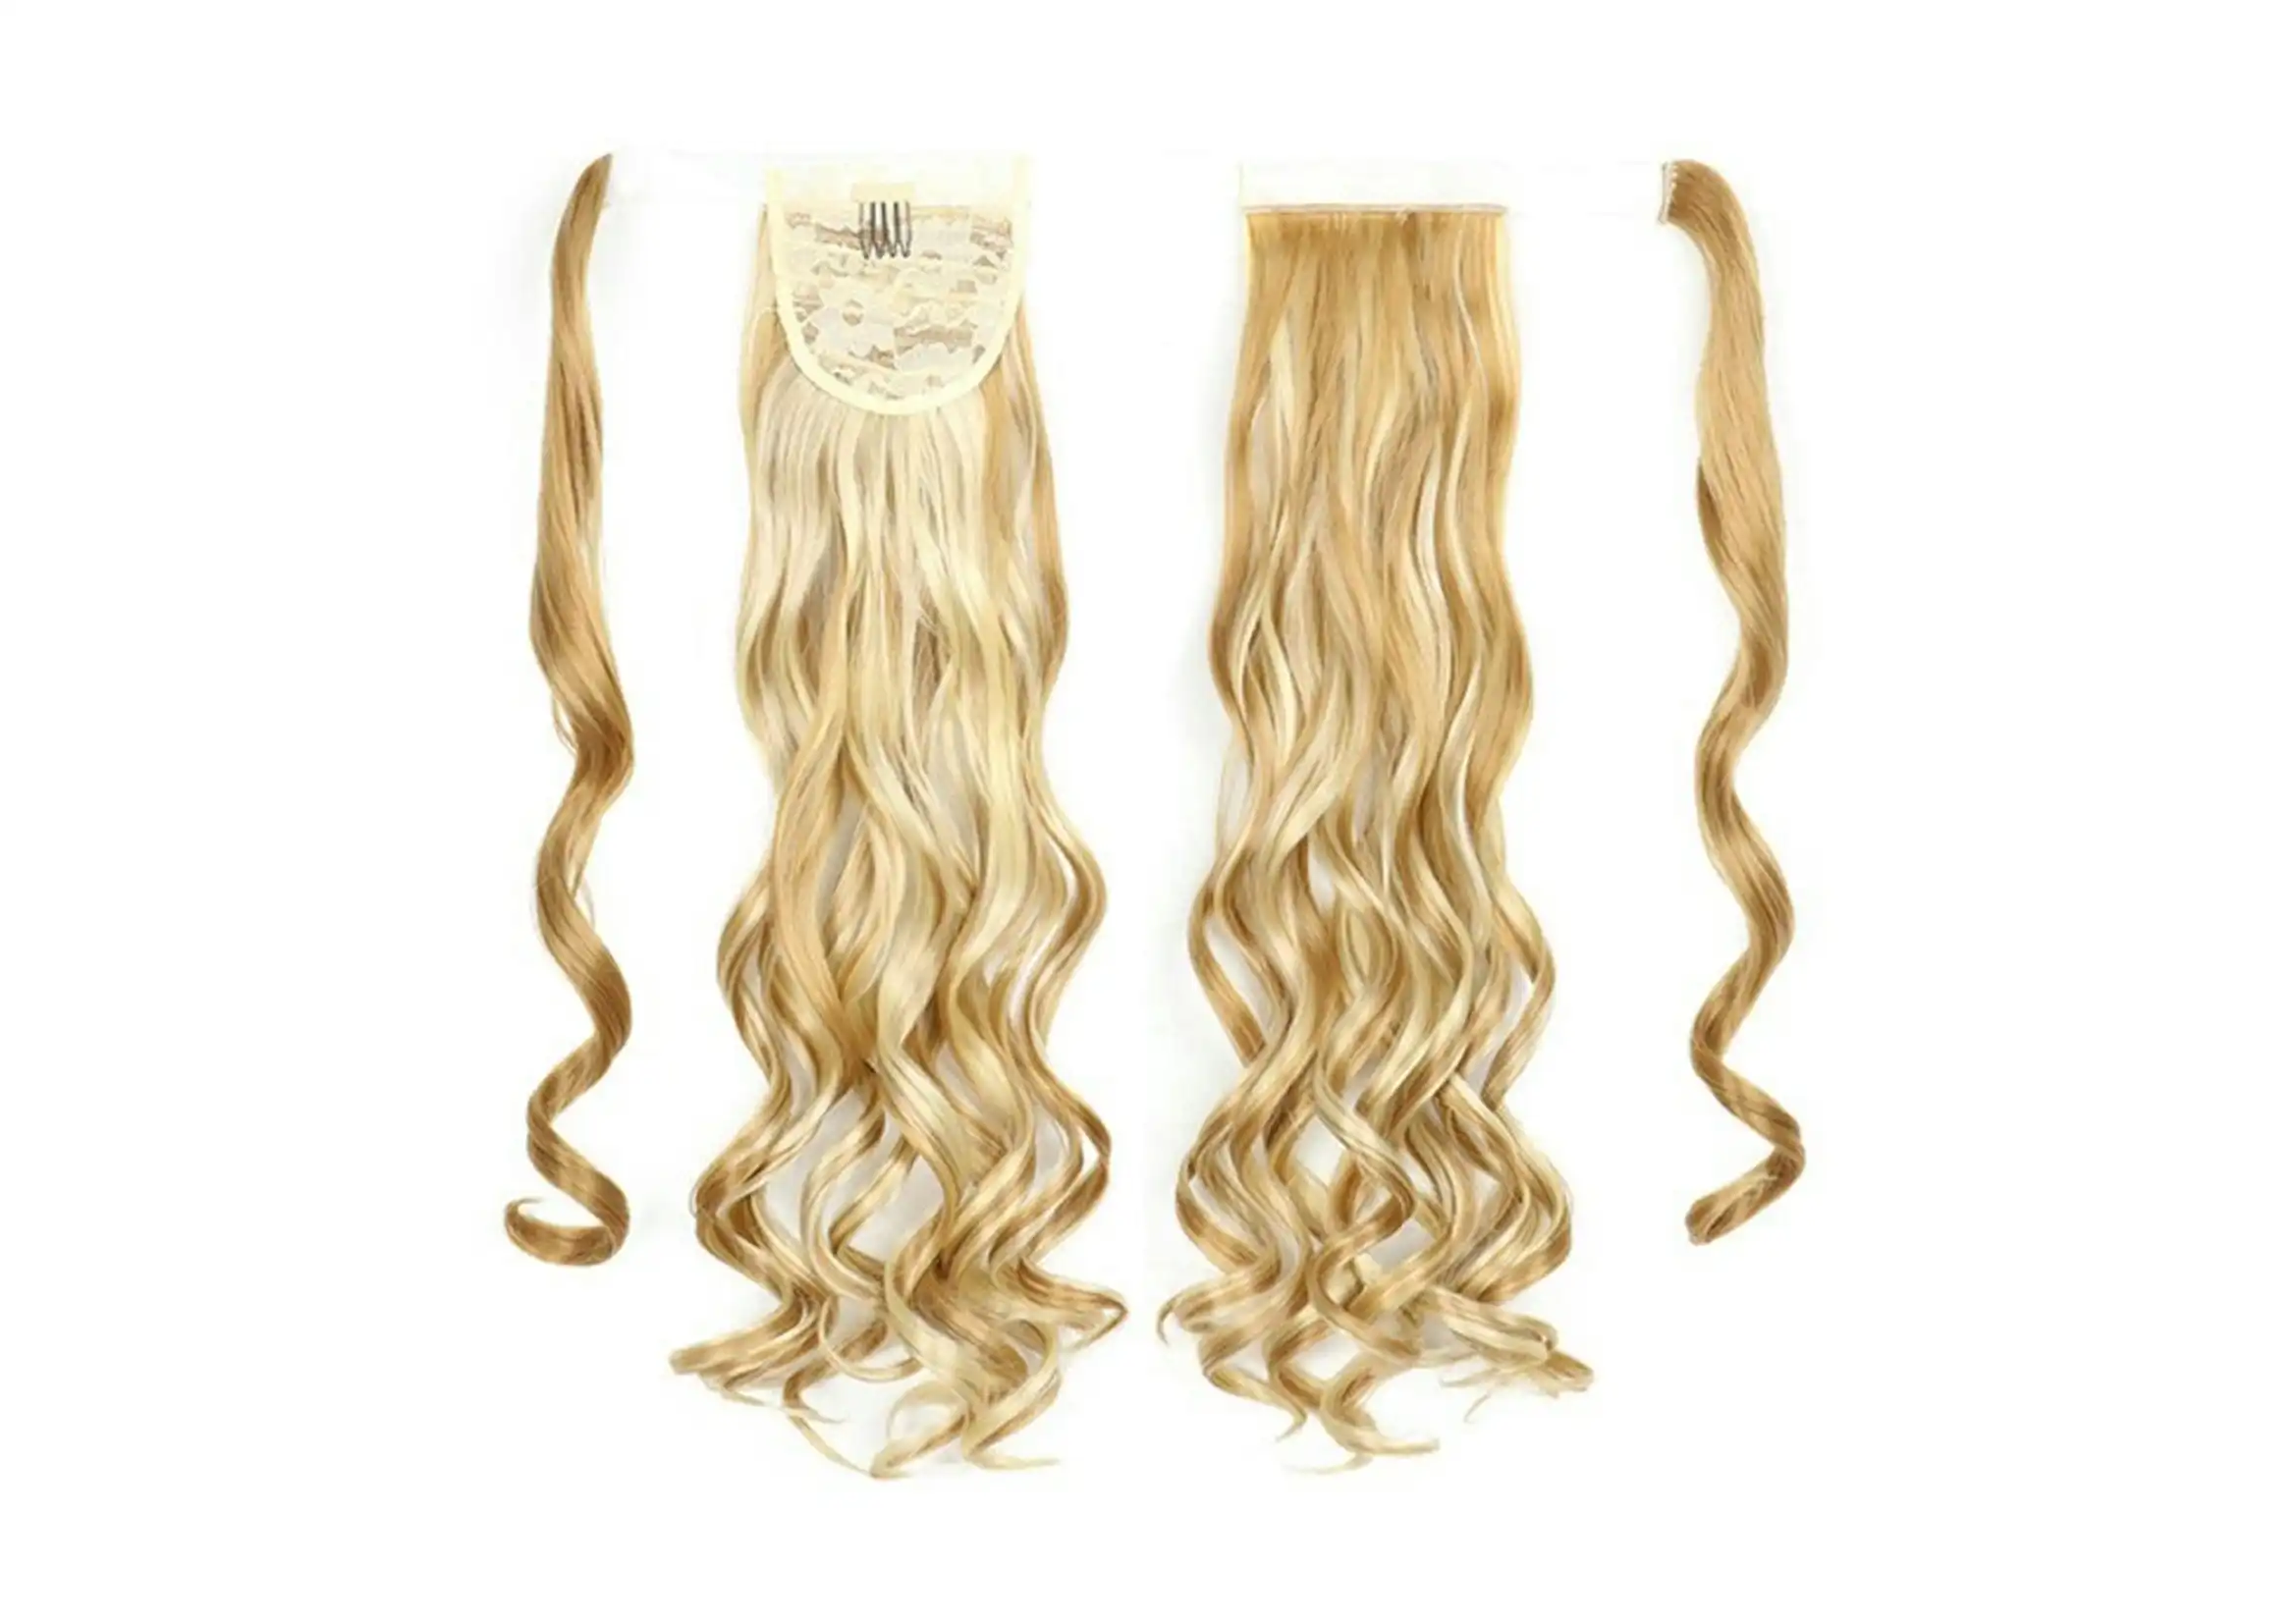 22" Medium Blonde Hair Extension Quality Synthetic Hair Ponytail Curly Wavy